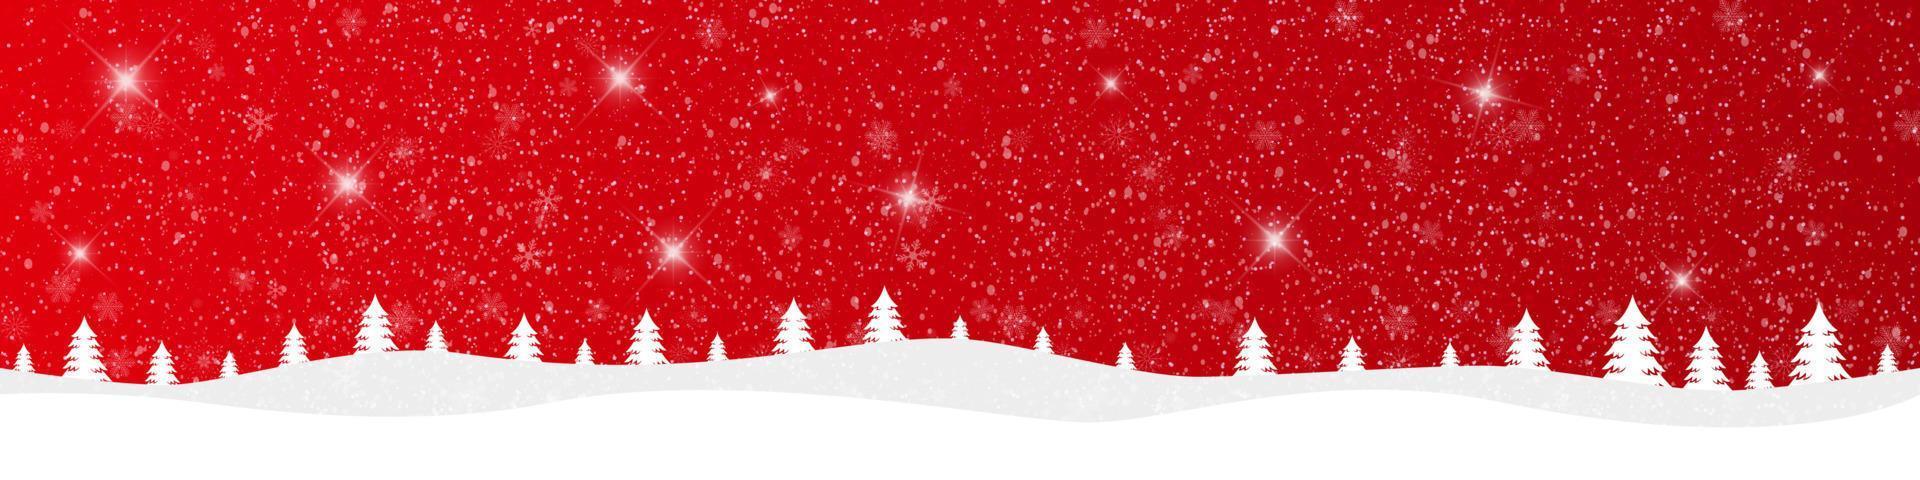 Merry Christmas and happy New Year  on red background with snowy landscape. Vector illustration.